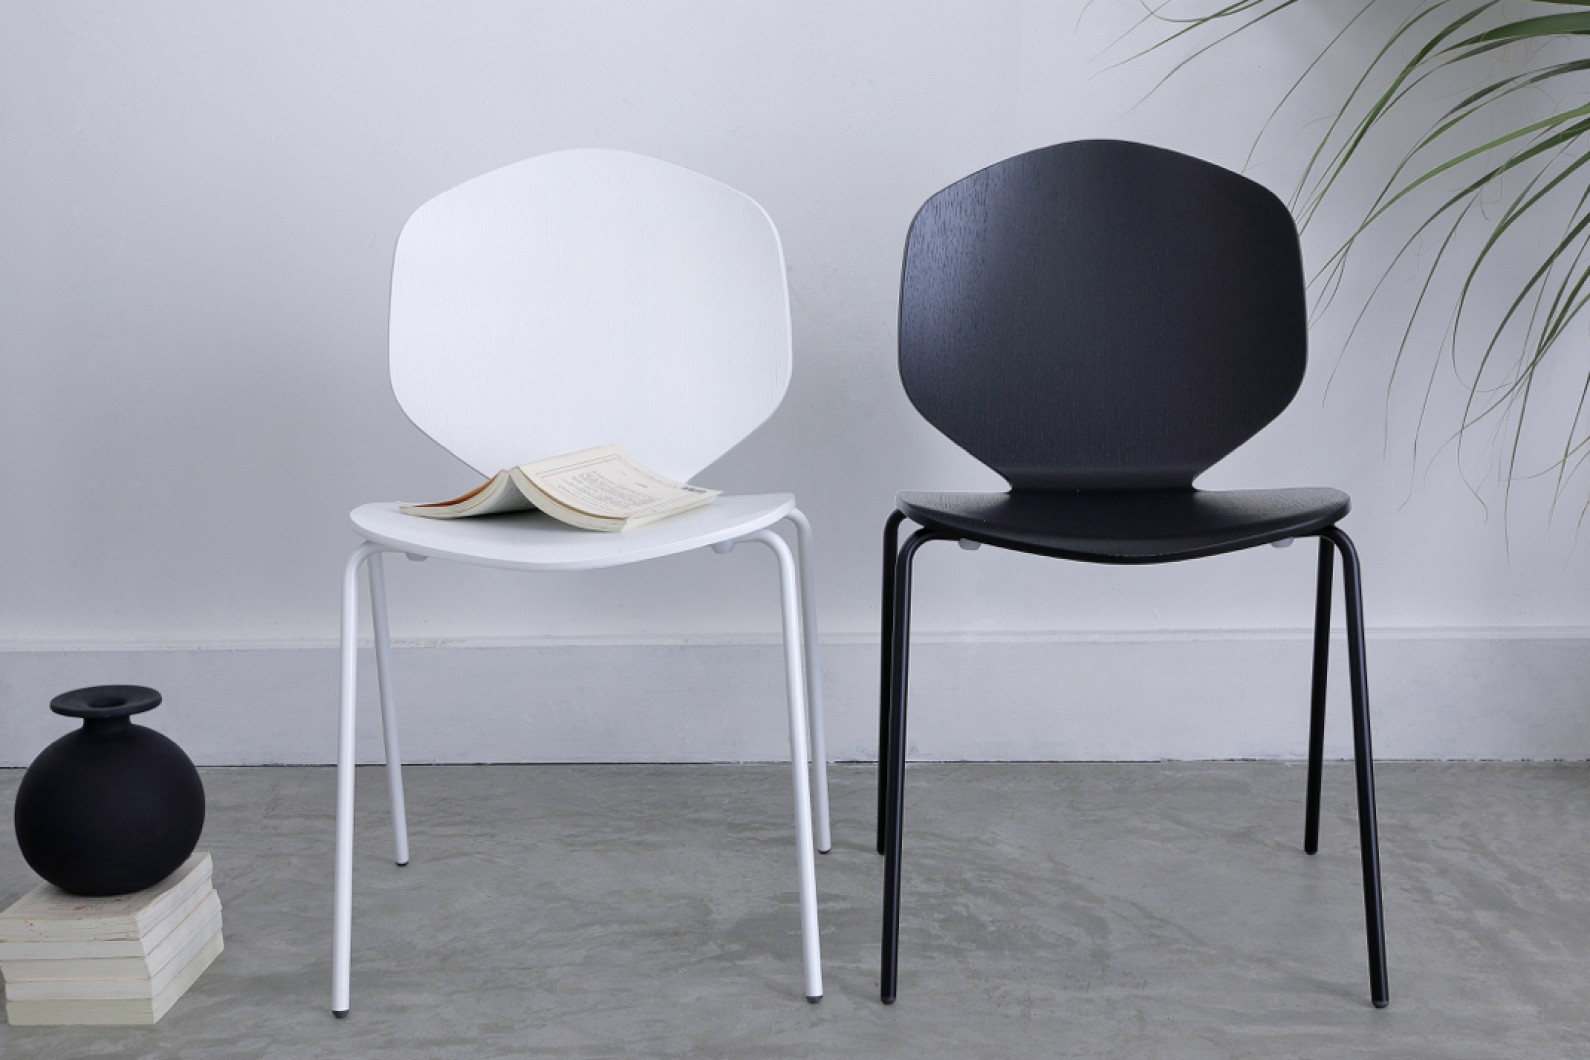 Loulou chair : wit - zwart